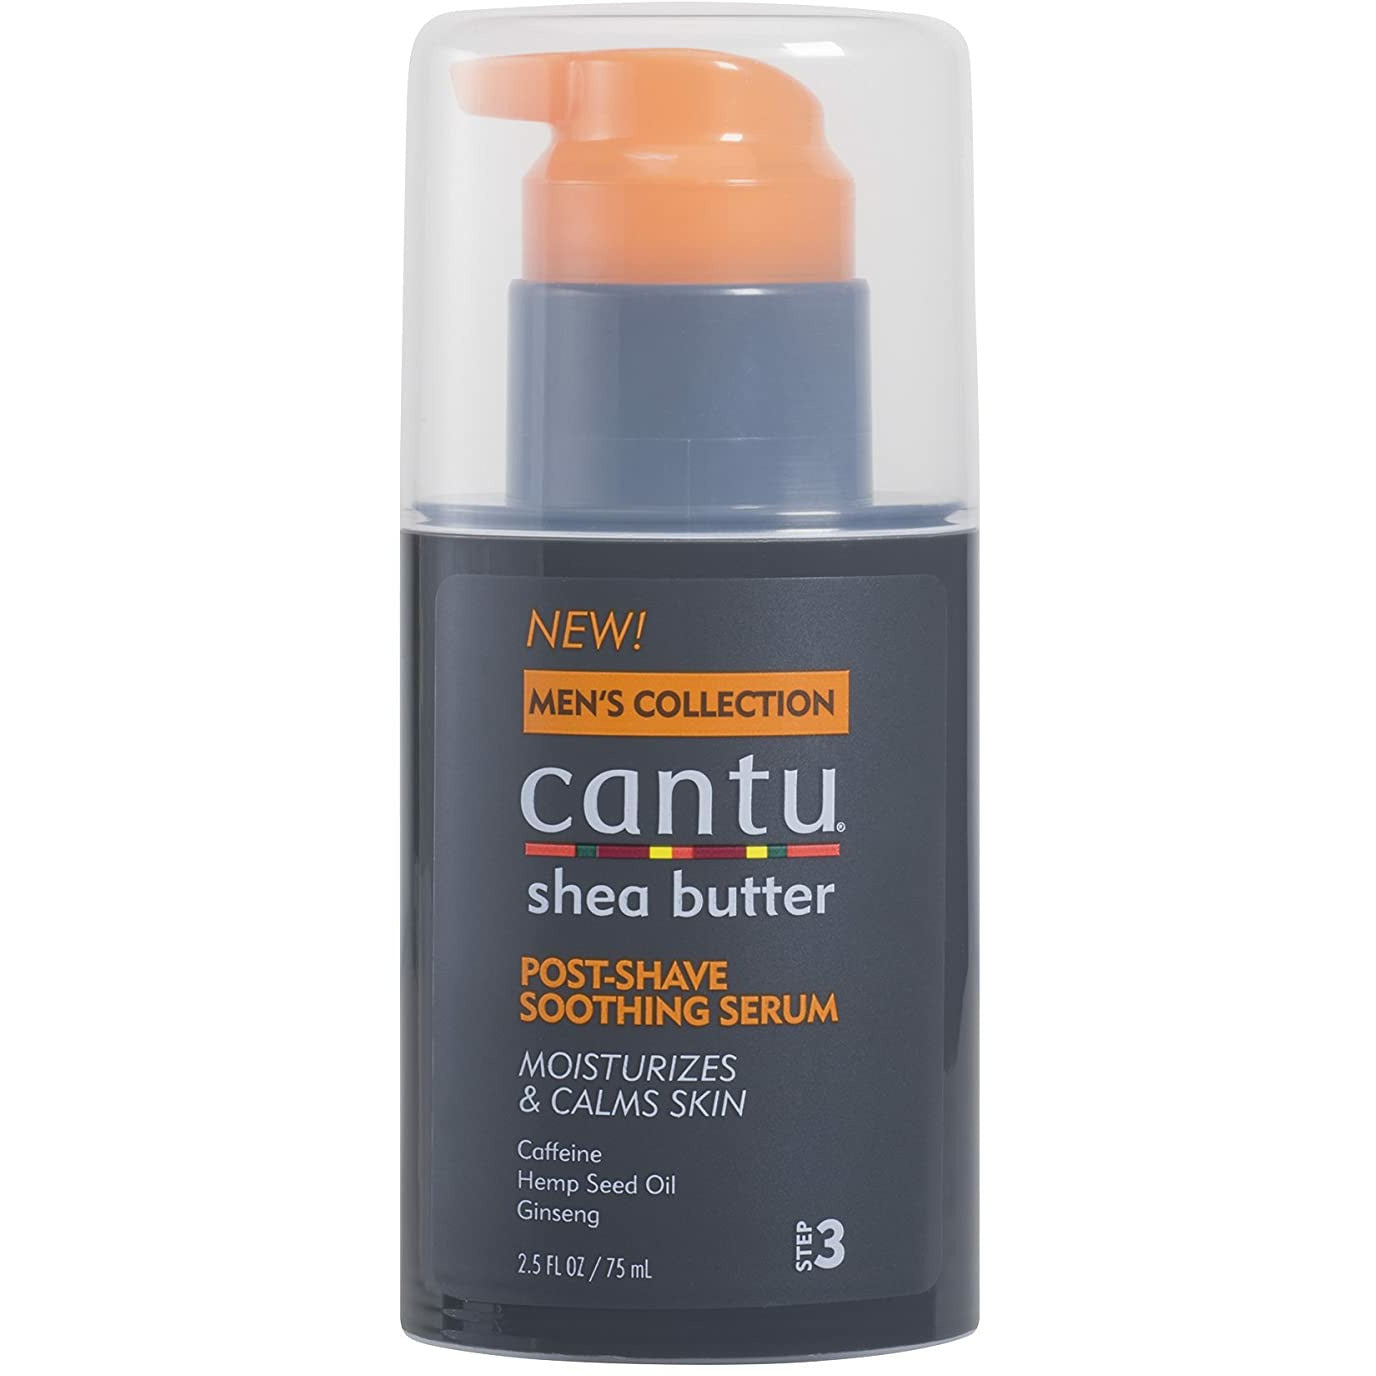 Cantu Men's Shea Butter Post Shave Soothing Serum, 2.5 Oz.